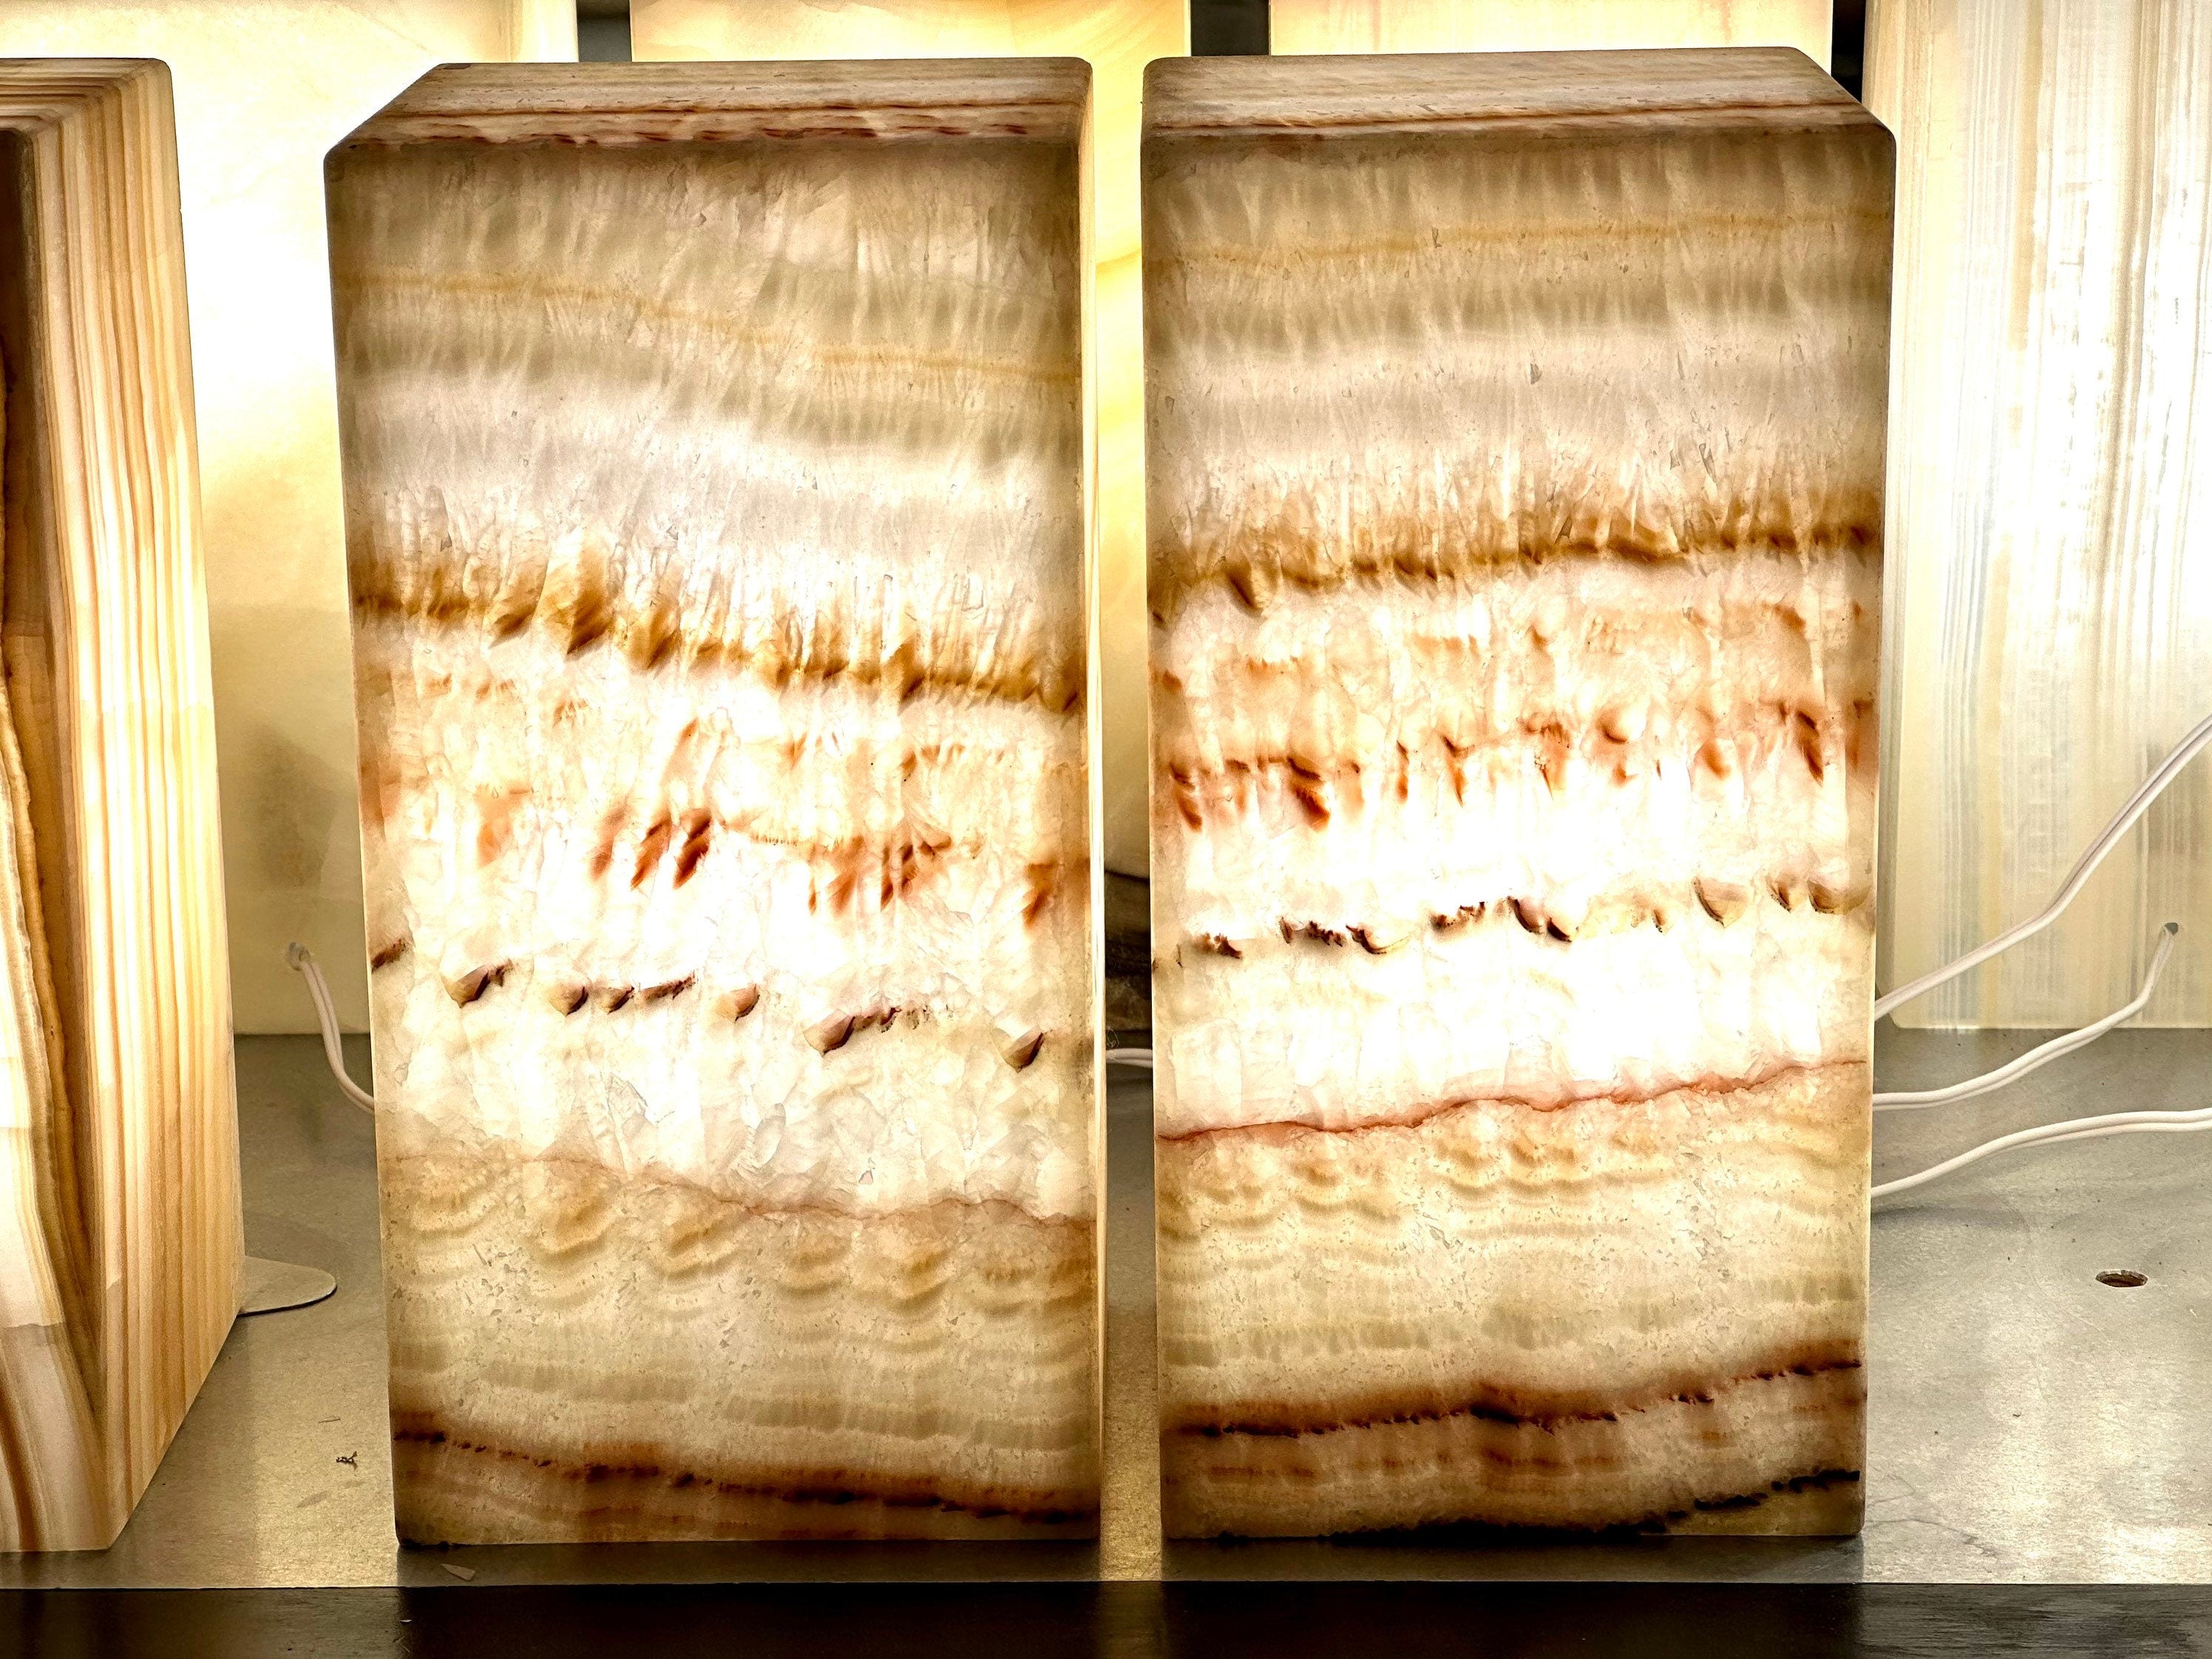 Beige Banded Onyx Lamp Set - Two Onyx Lamps - Onyx Stone Table Lamps - Nightstand Lamps - Alabaster Lamps - Handmade Lamps & Decor